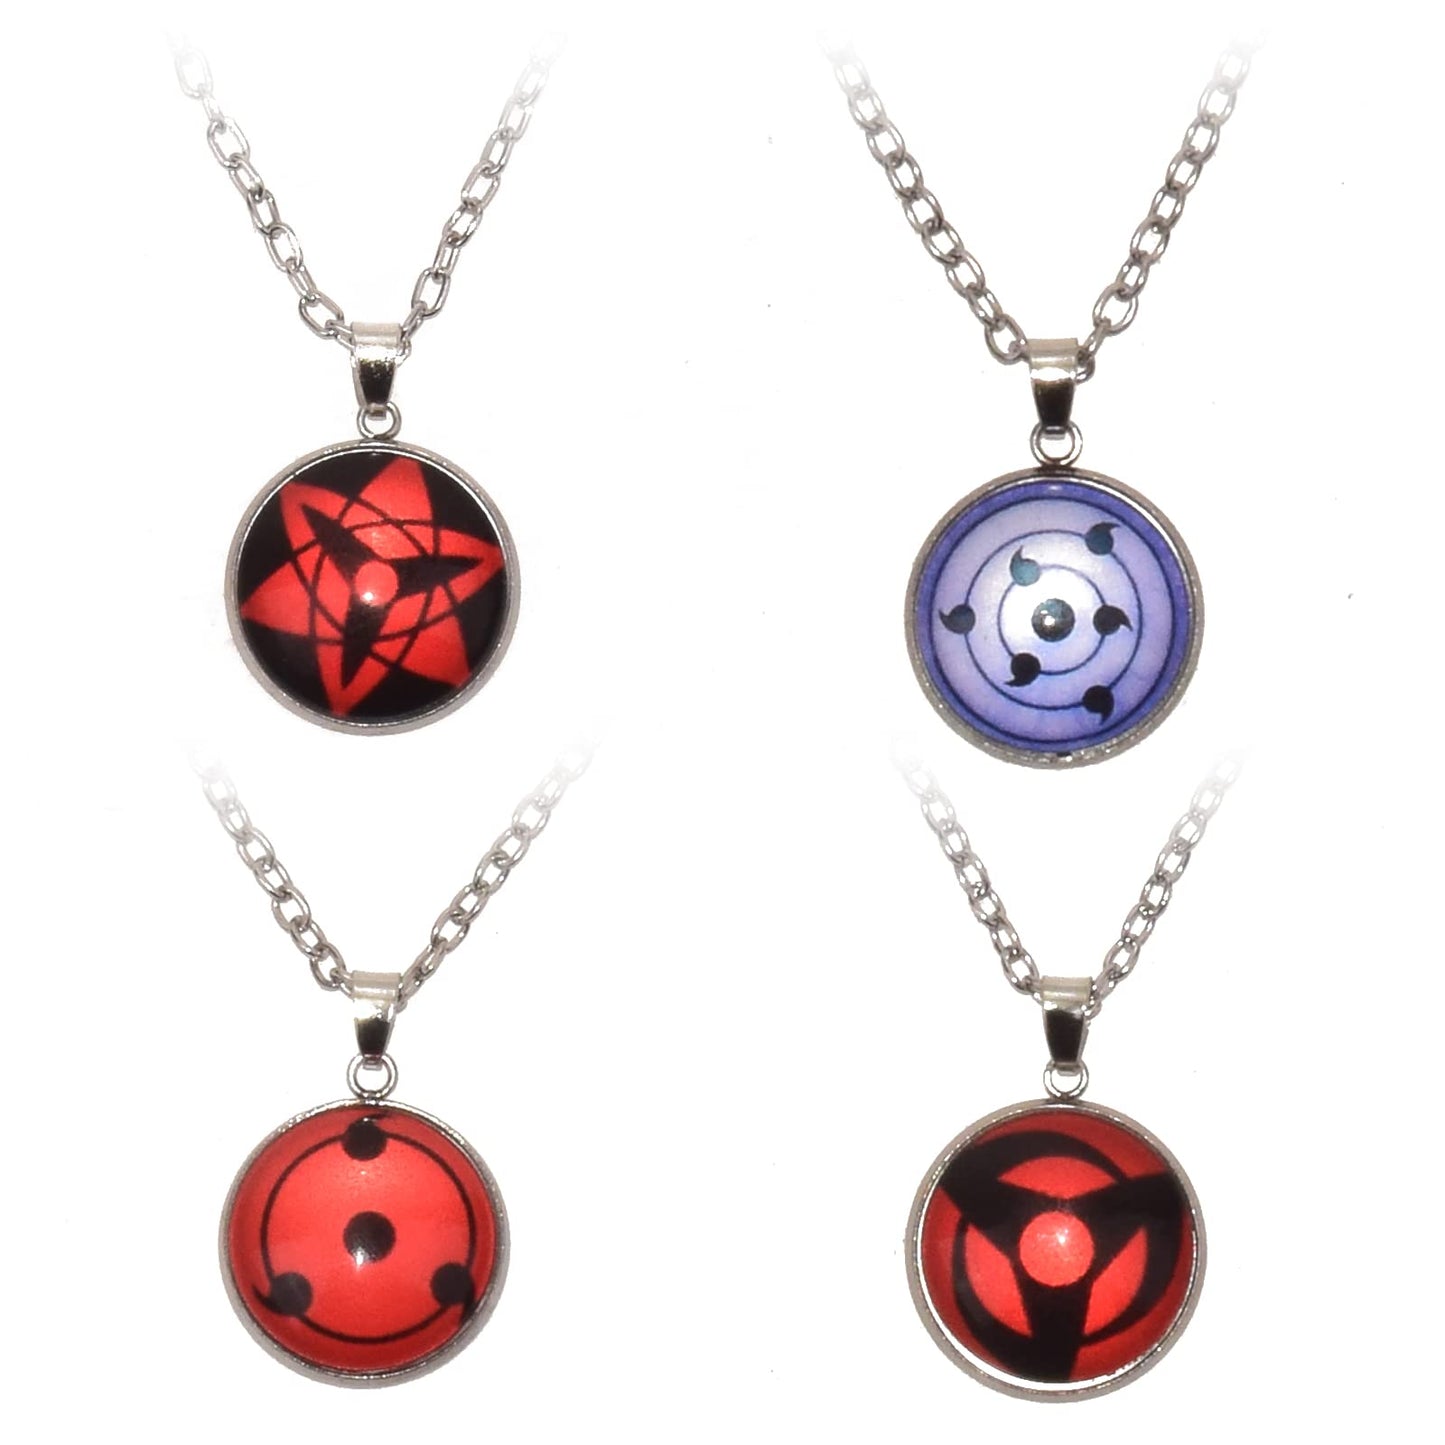 I3C Anime Pendant with Sharingan Design, Cosplay Accessory Zinc Alloy Naruto Necklace Unisex for Men, Women and Anime Fans